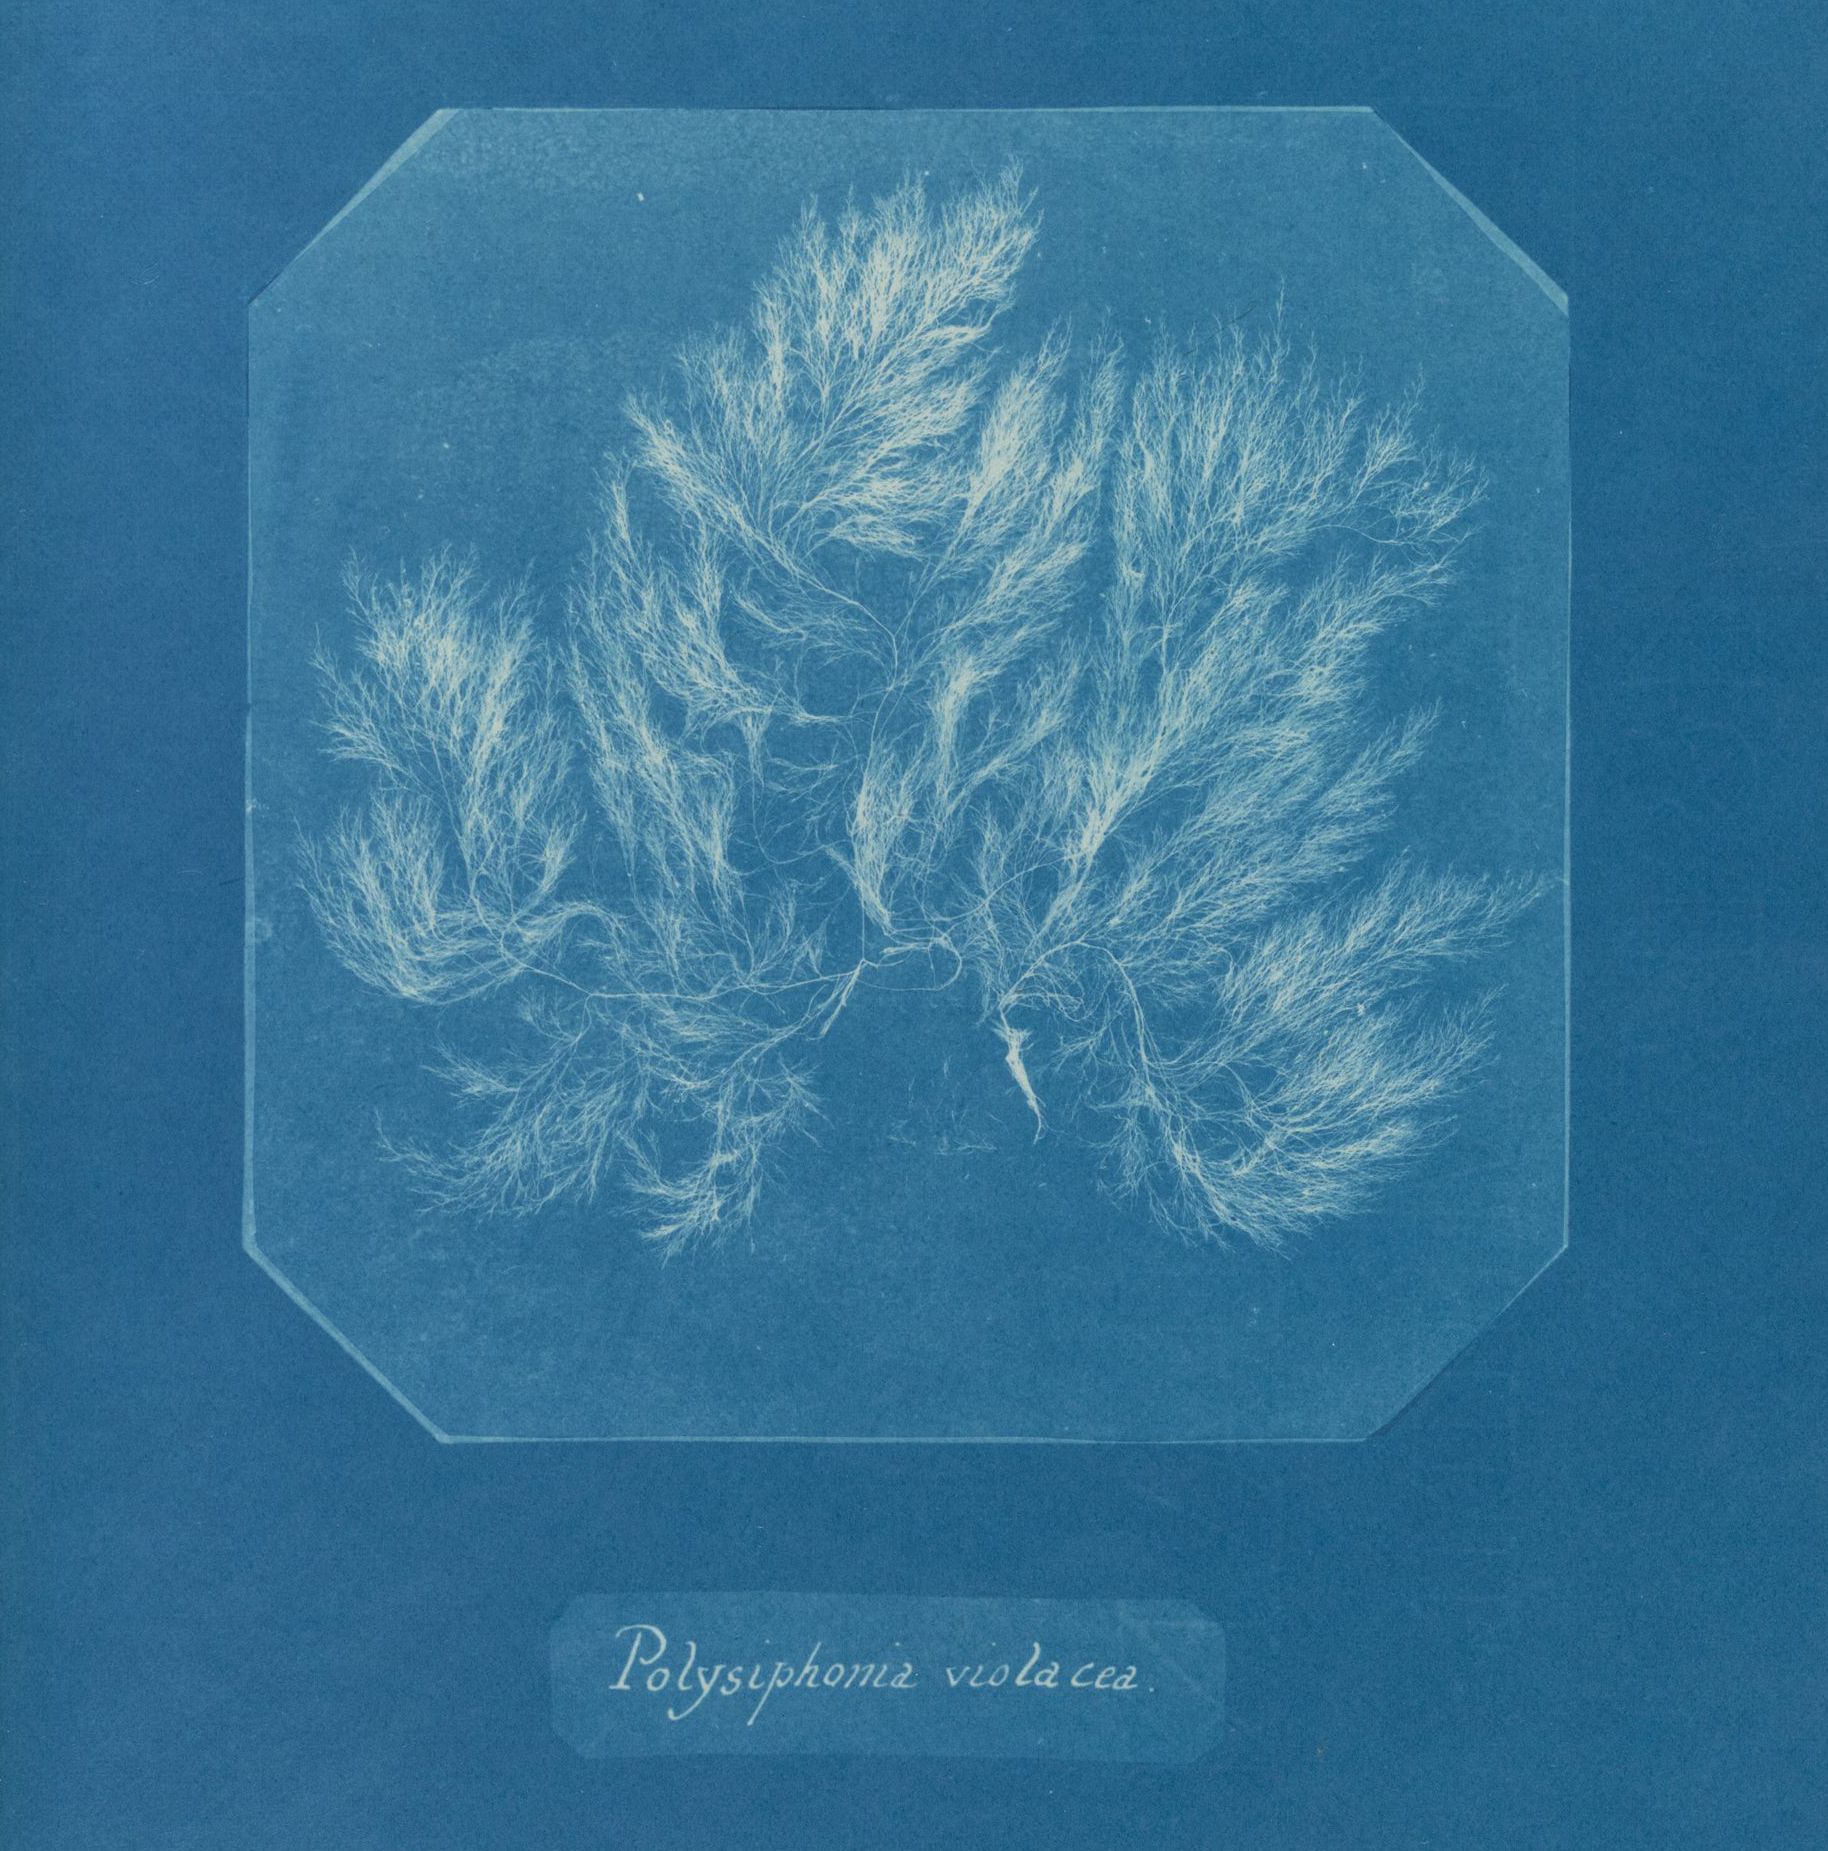 Archival image of a feathery algae silhouette framed and contrasted by a deep blue. Text reads, "Polysiphonia violacea".